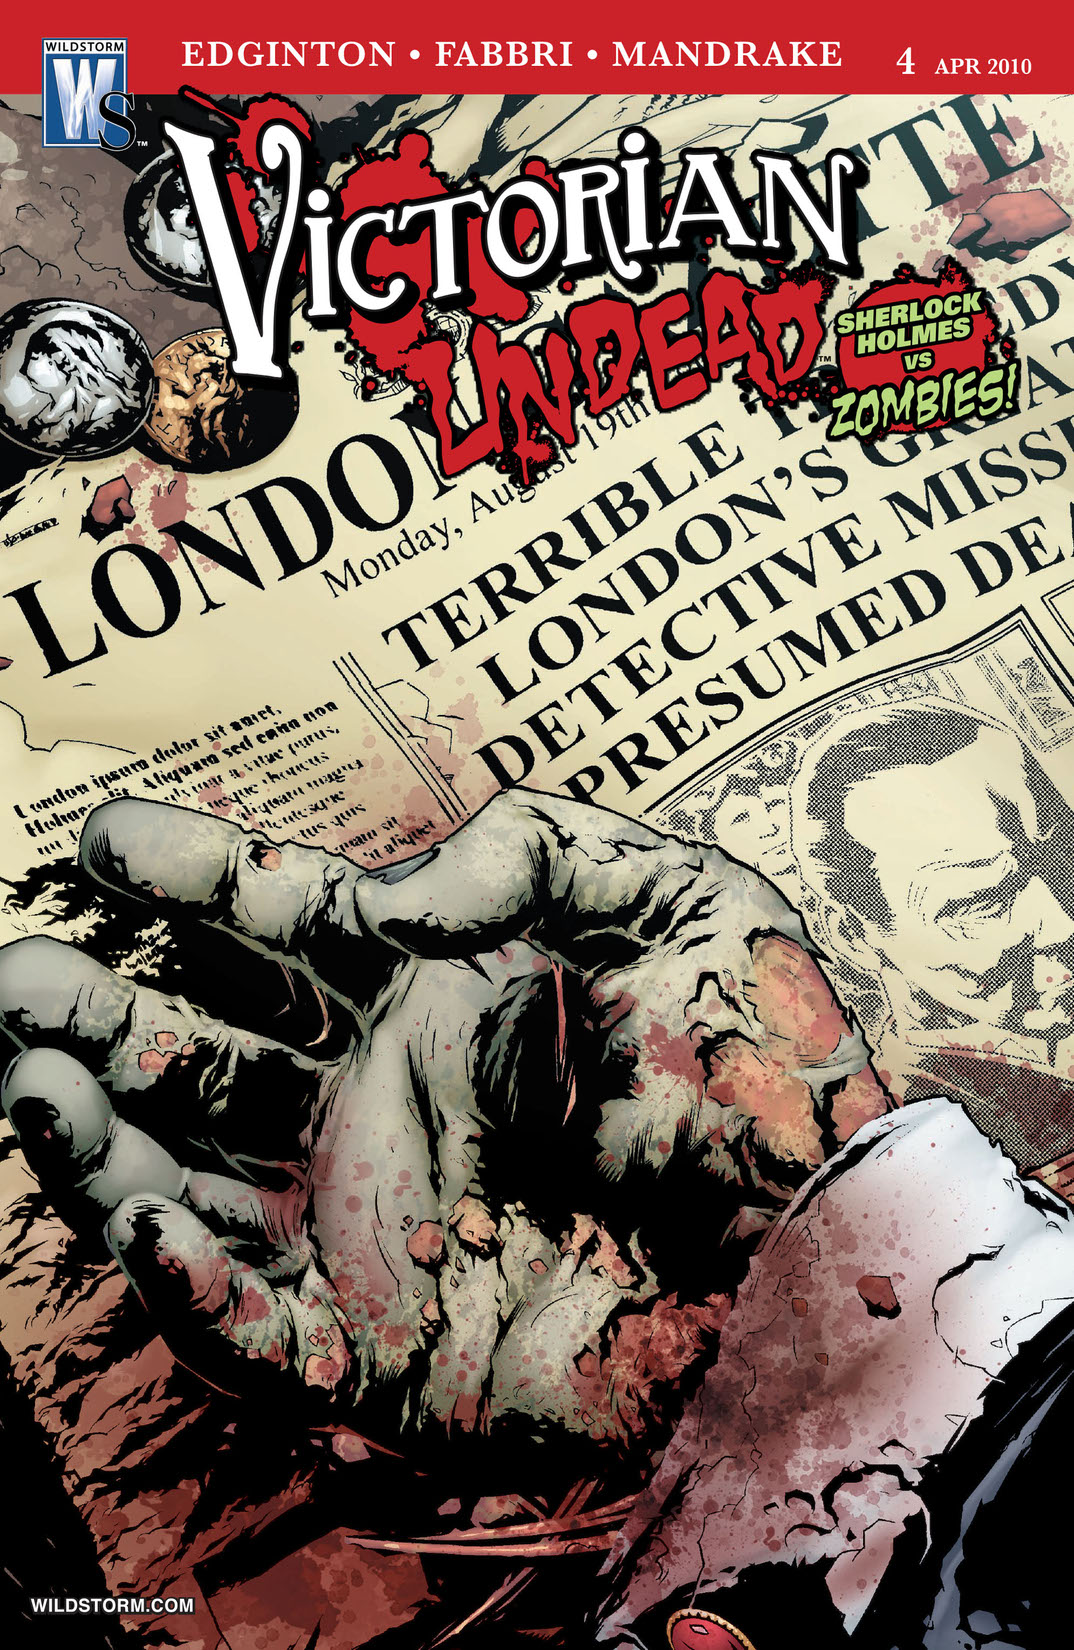 Victorian Undead #4 preview images